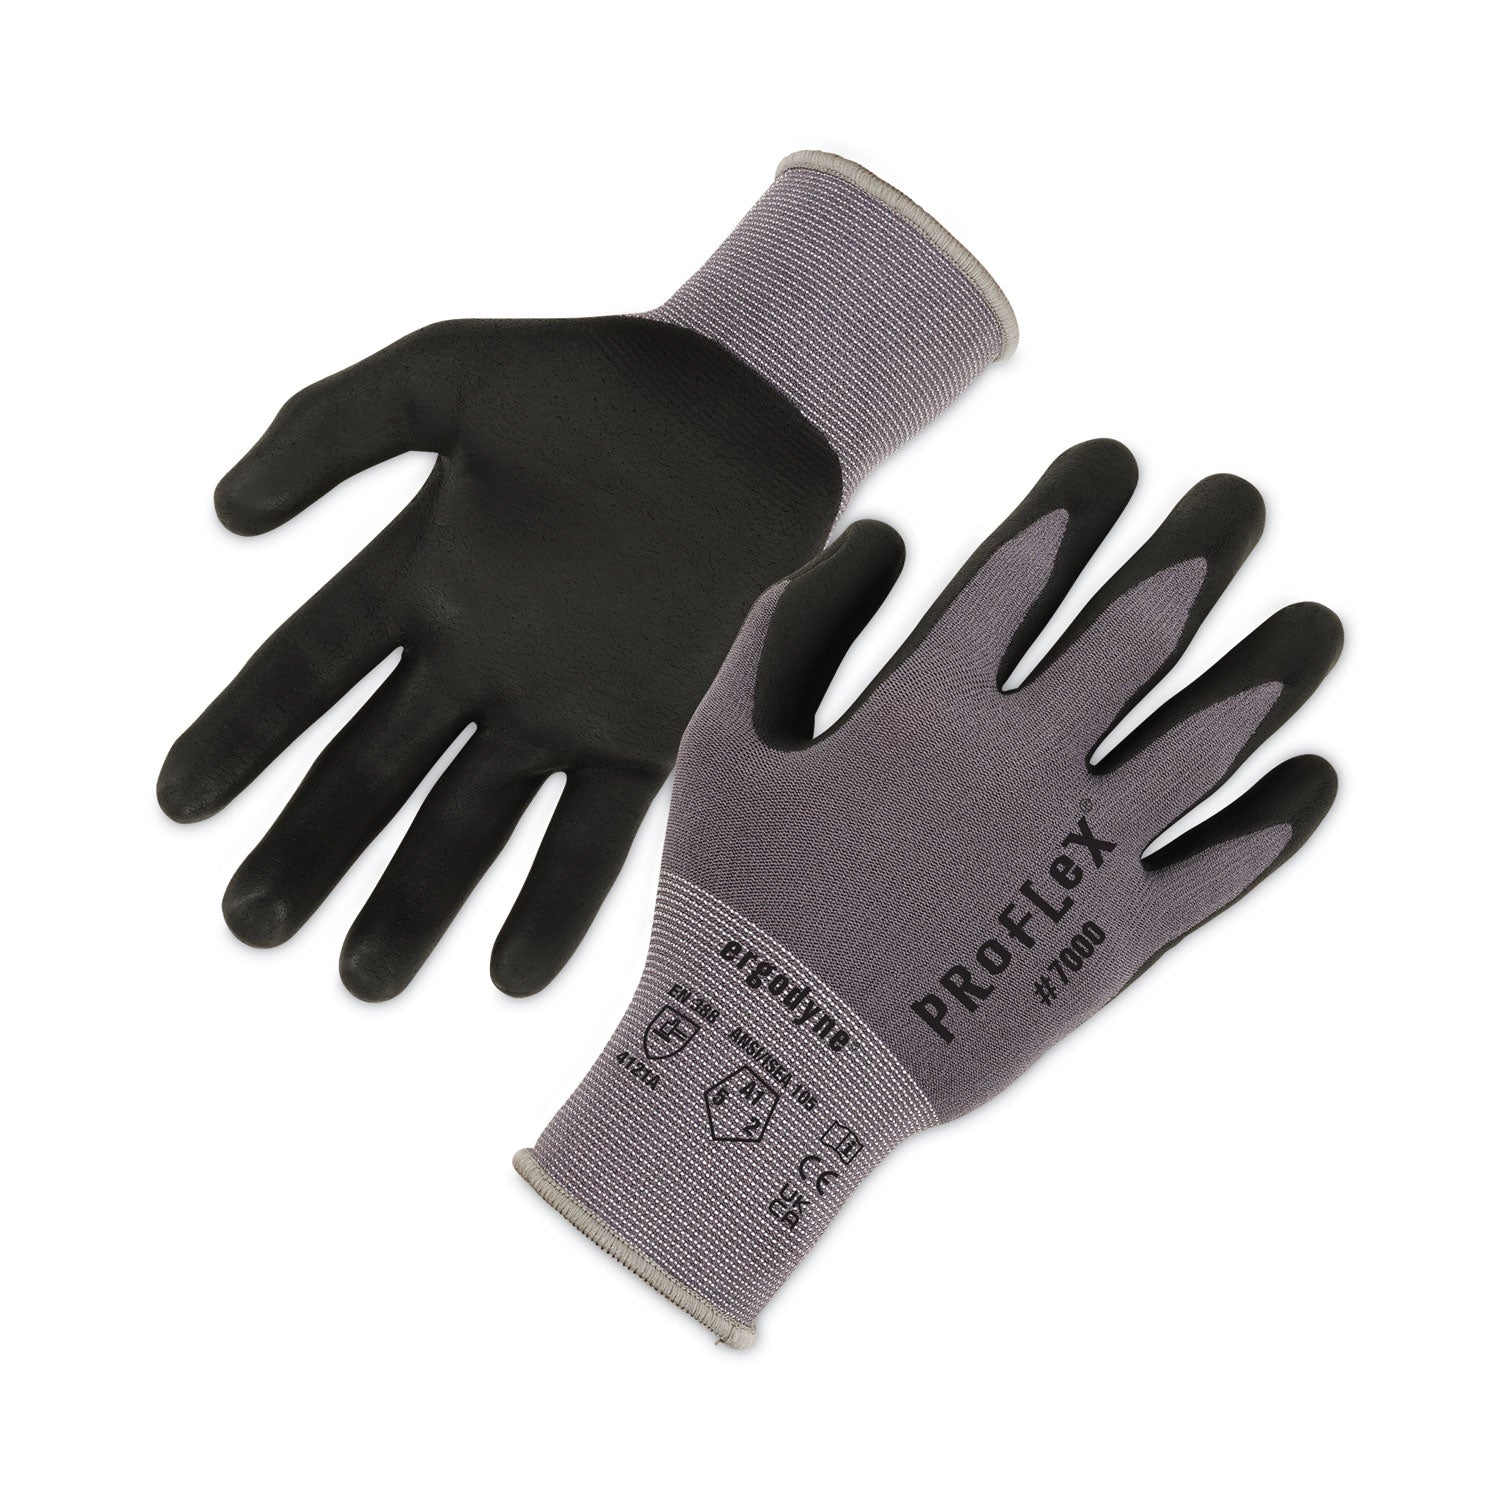 proflex-7000-nitrile-coated-gloves-microfoam-palm-gray-2x-large-12-pairs-pack-ships-in-1-3-business-days_ego10366 - 1